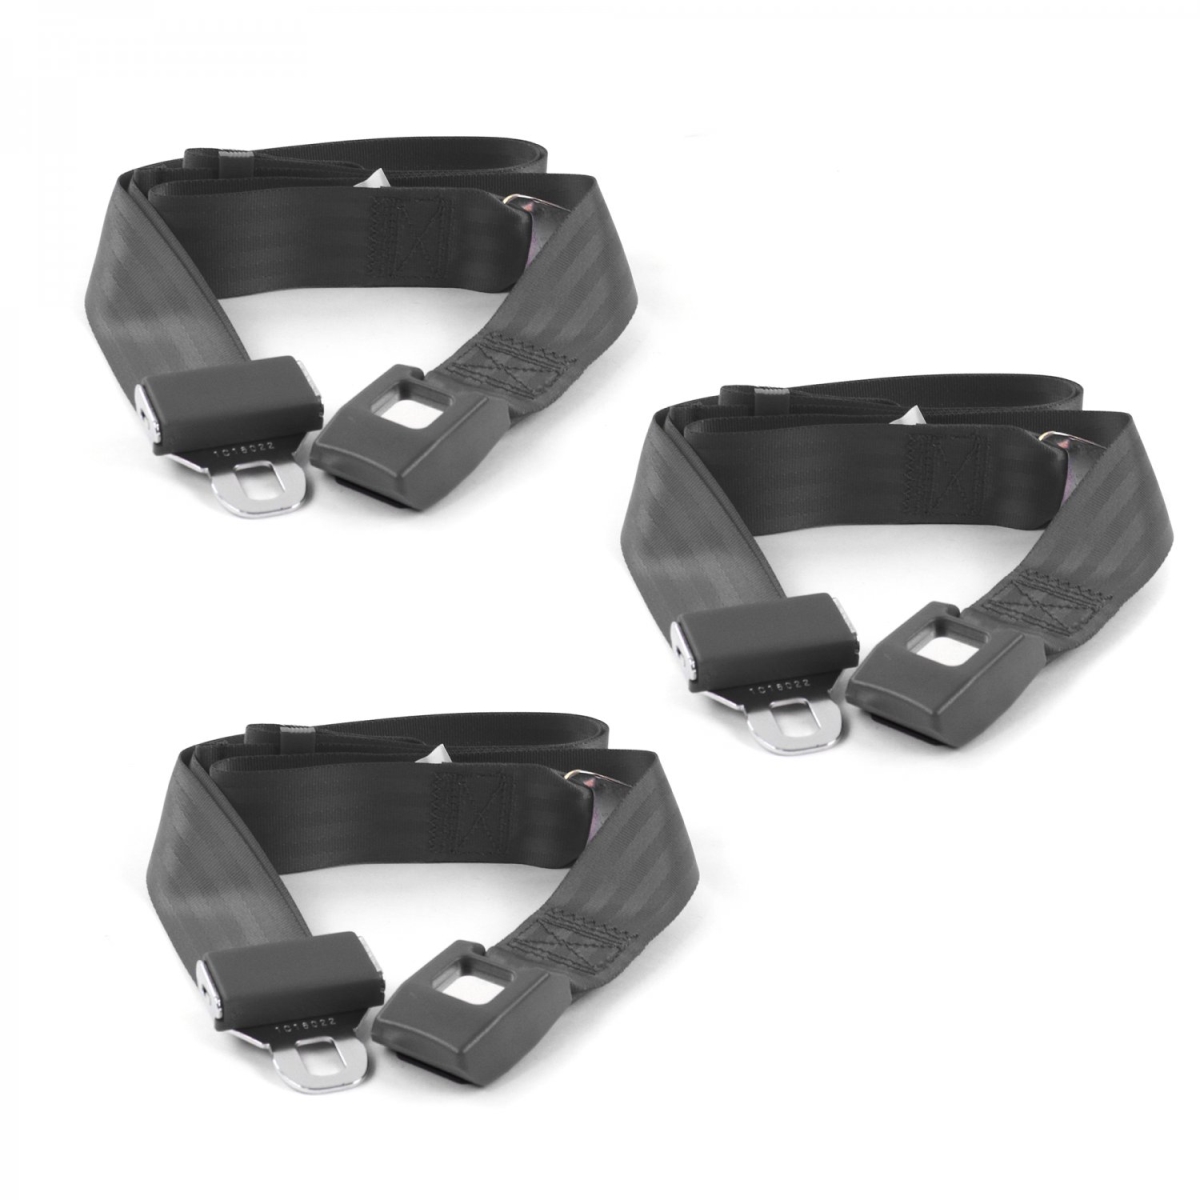 660577 Chevy Chevelle 1964-1967 Standard 2 Point Charcoal Lap Bench Seat Belt Kit - 3 Belts -  safeTboy